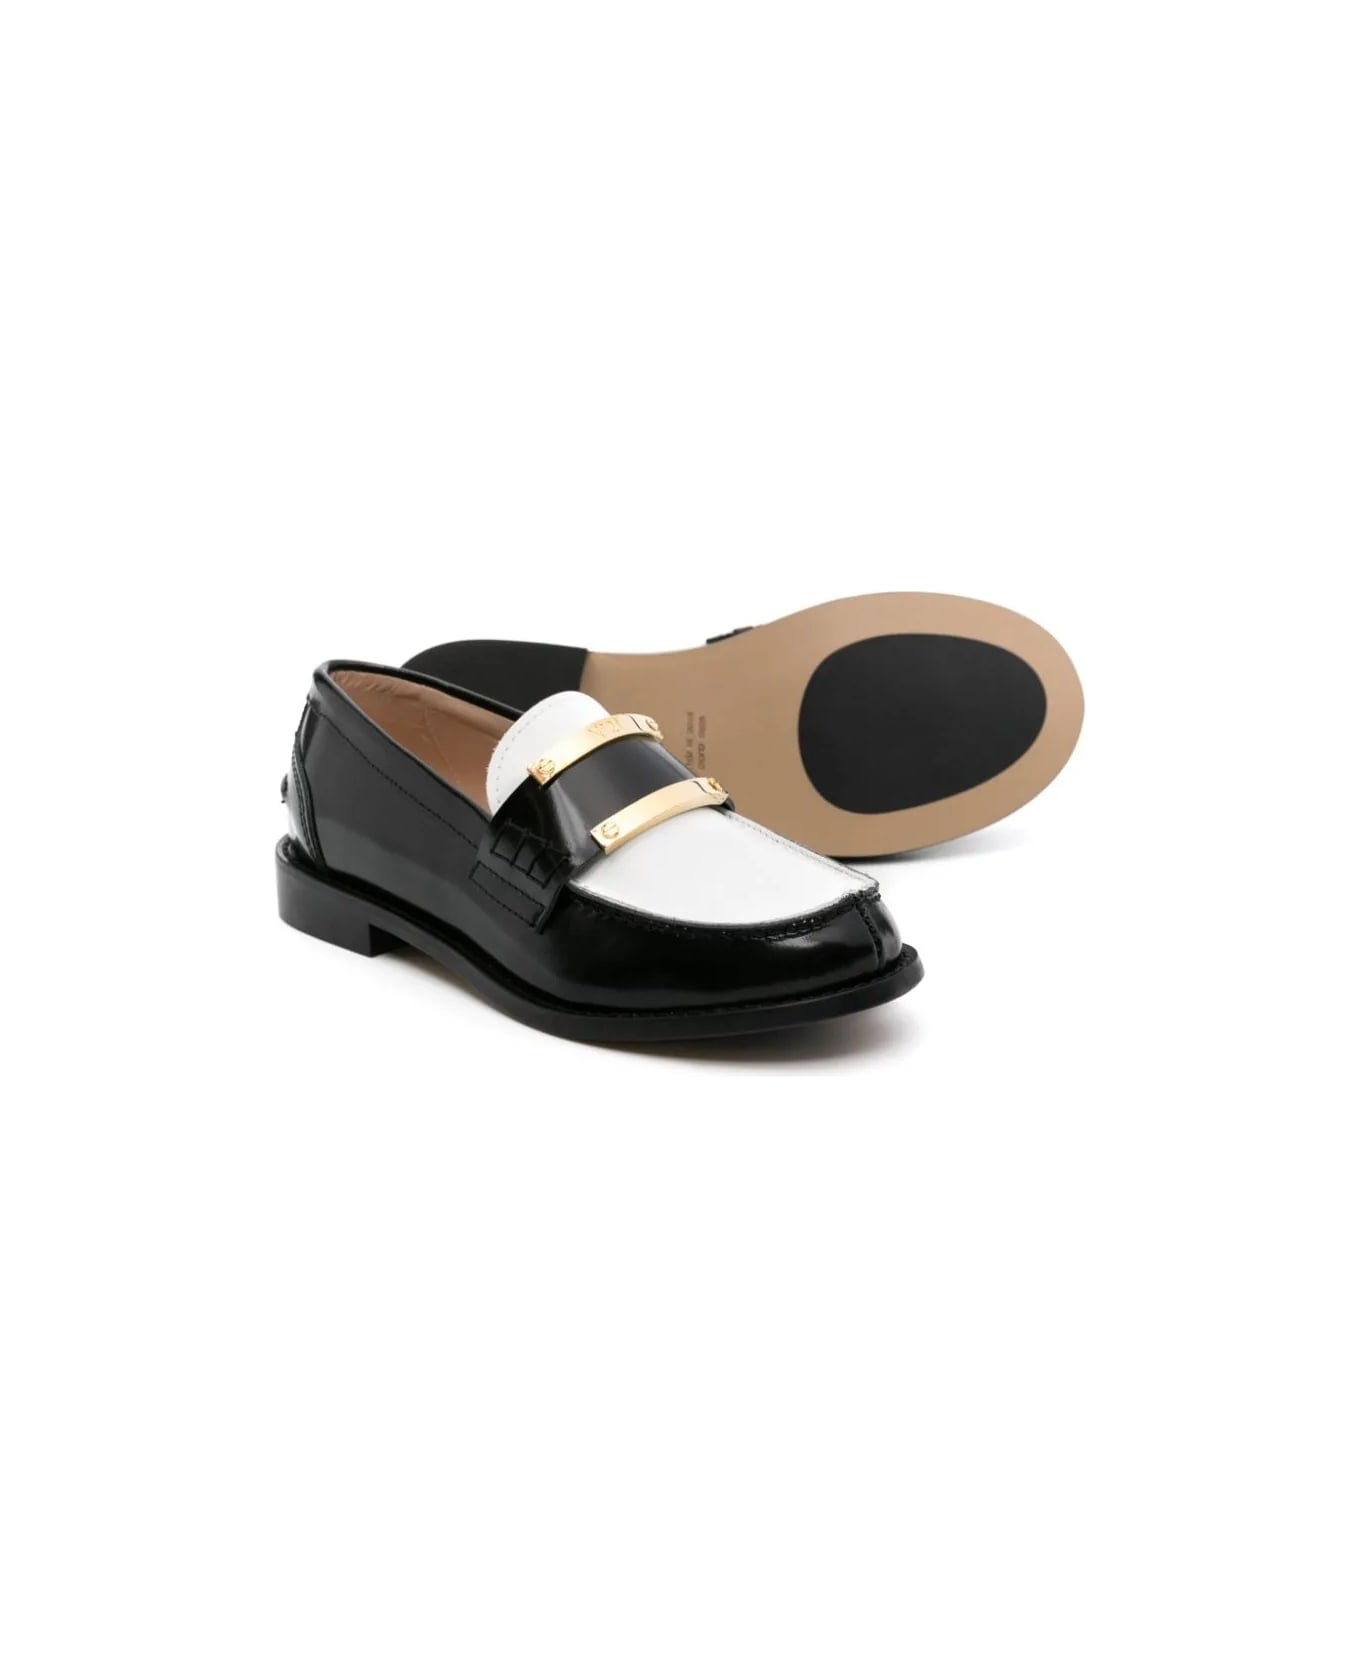 N.21 Loafers With Color-block Design - Black